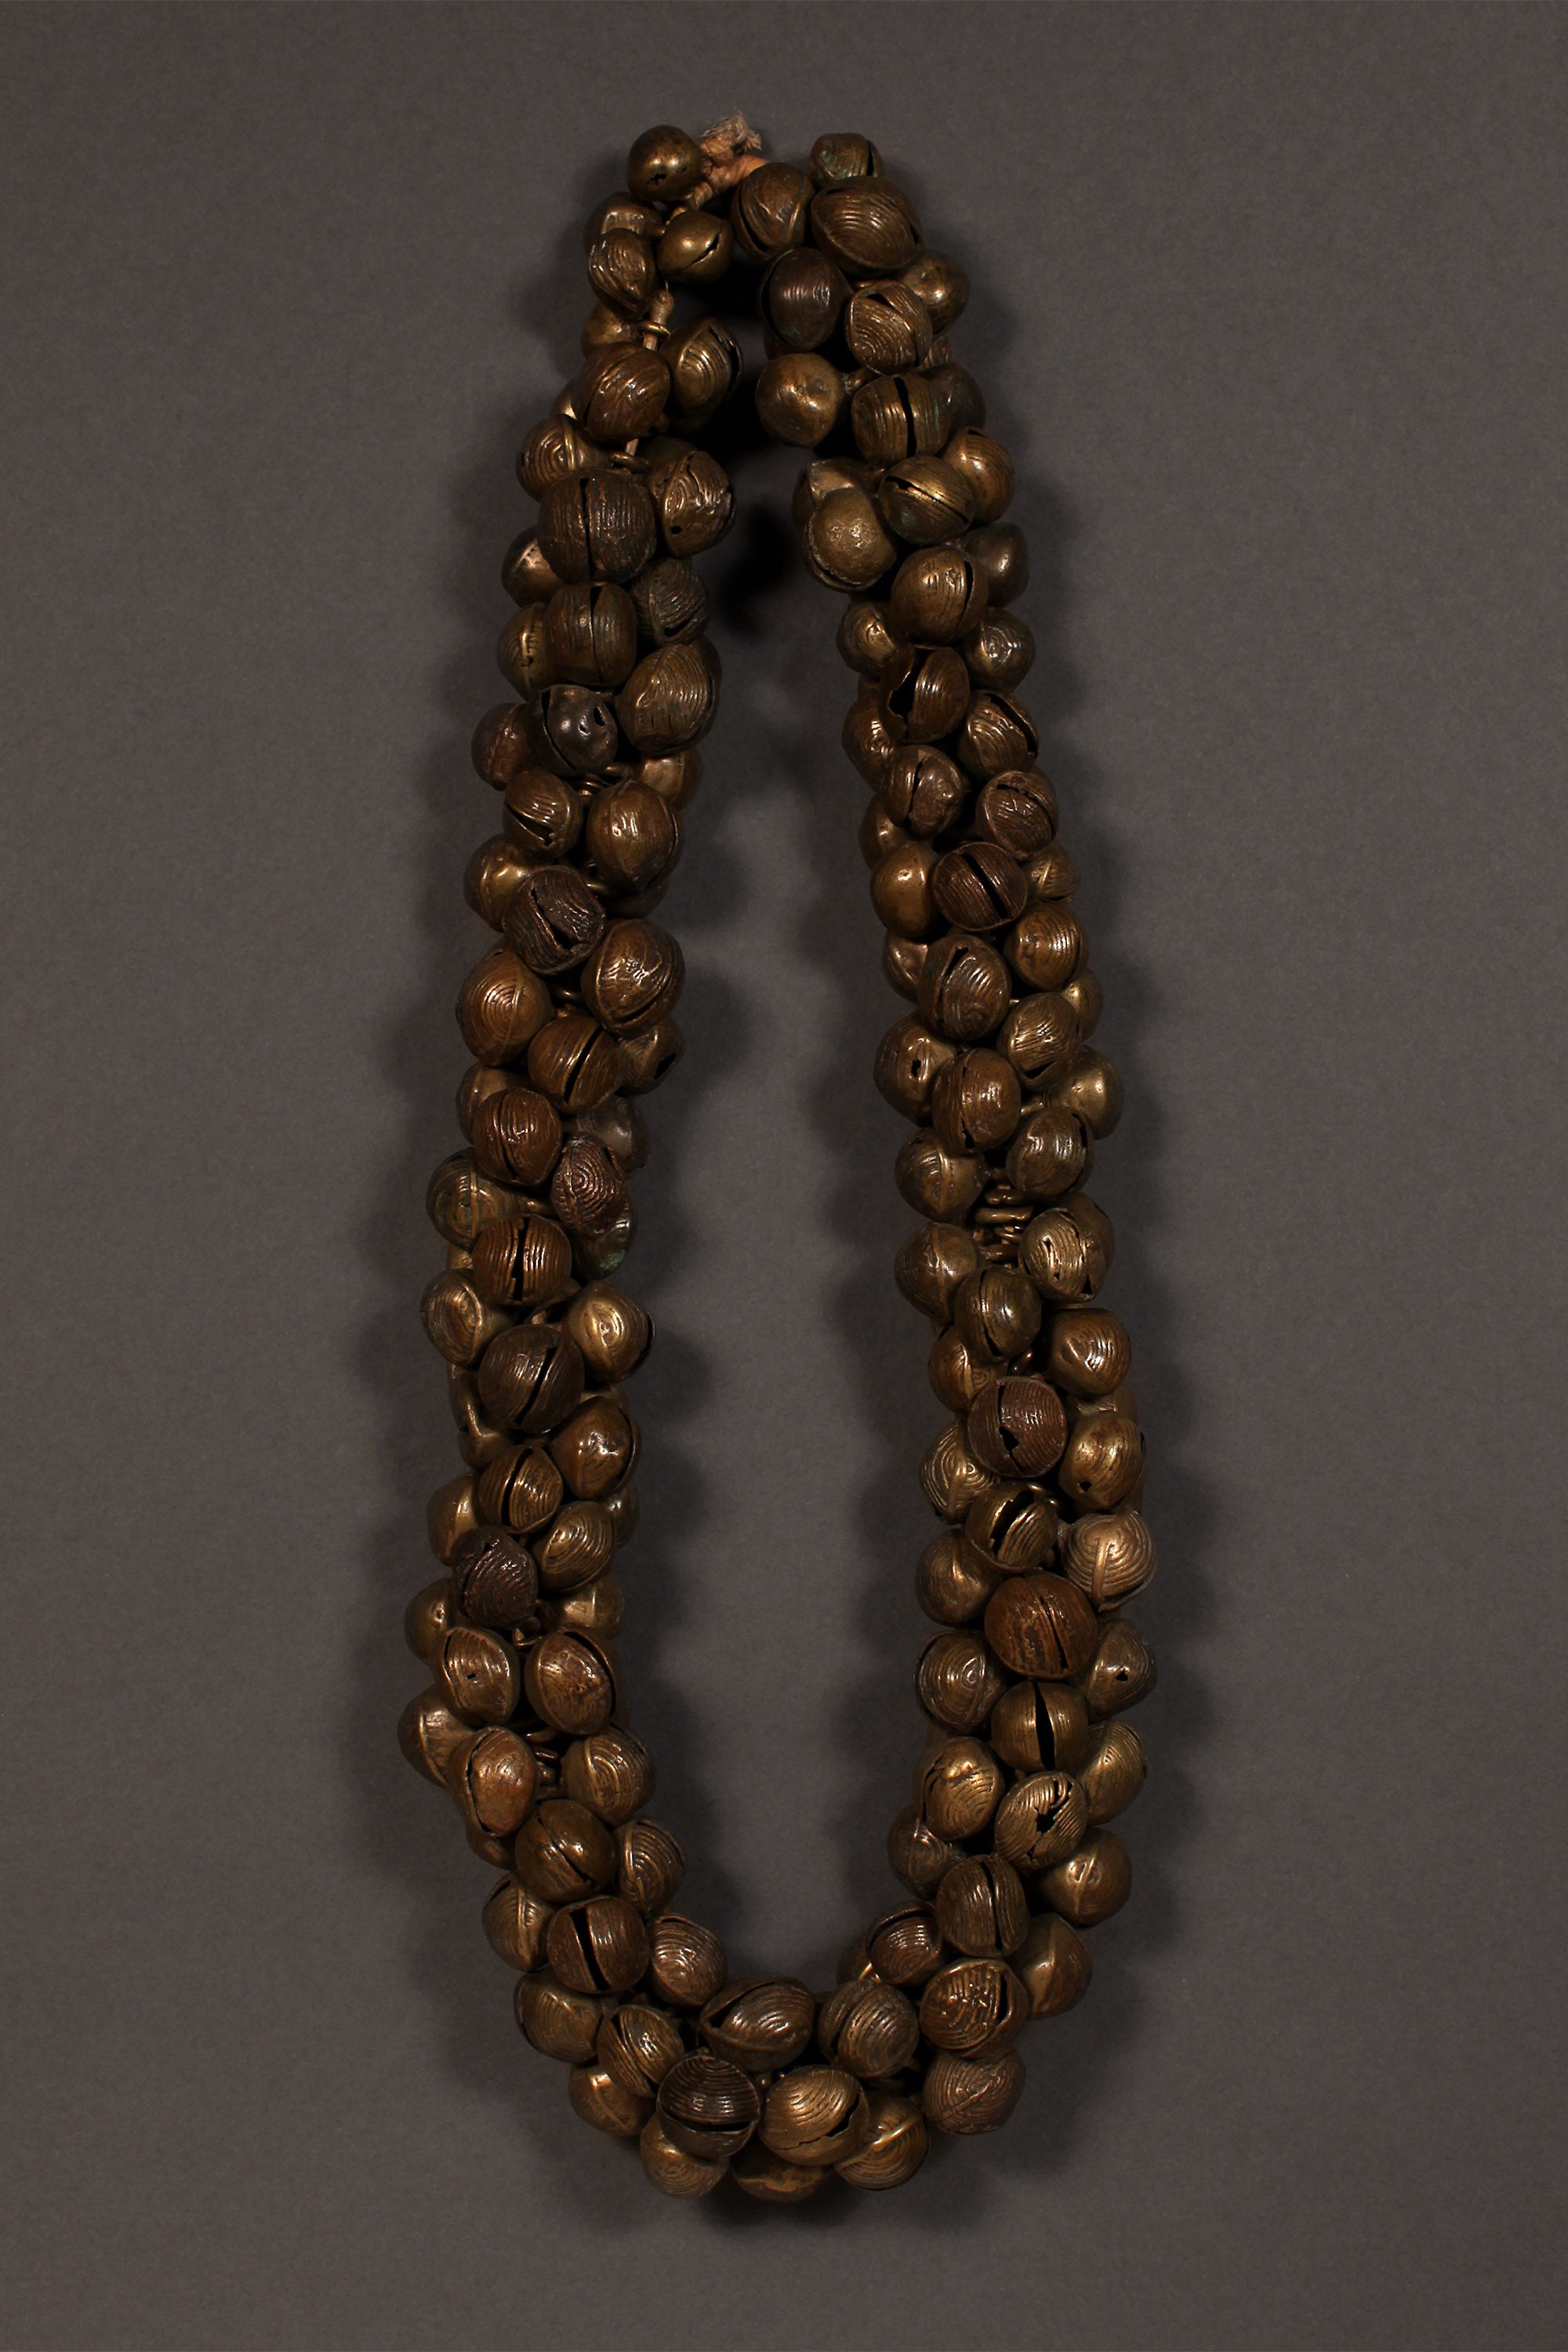 Tribal Trade Beads - African Trade Beads - Tradition - African Decorative Beads - Chevron Millefiori - Krobo - Feather - Melon - King Eye - African Culture - History - Jewelry Making -  This stunning Bronze Necklace is a must-have for collectors. Its full strand of ancient Yoruba Trade Beads gives it an amazing level of detail and a stunning vintage aesthetic. A perfect addition to any jewellery collection, the Bronze Necklace will not disappoint.  Length: 14 inches